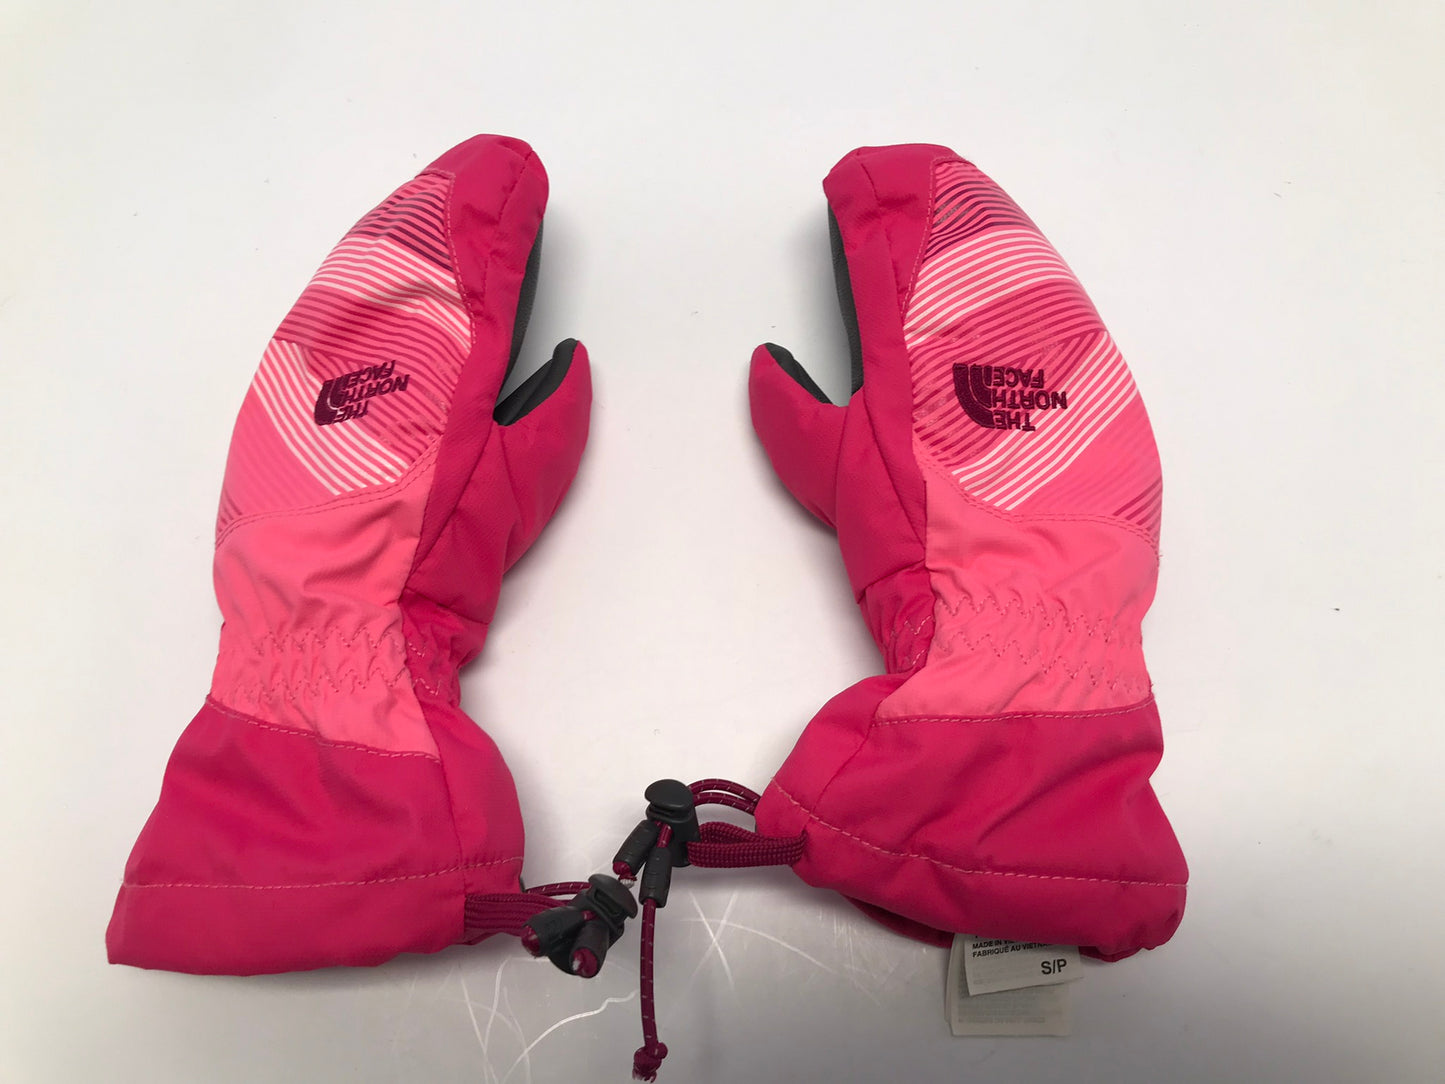 Winter Gloves and Mitts Child Size 4-6 The North Face Dry Vent Pink Black Excellent As New